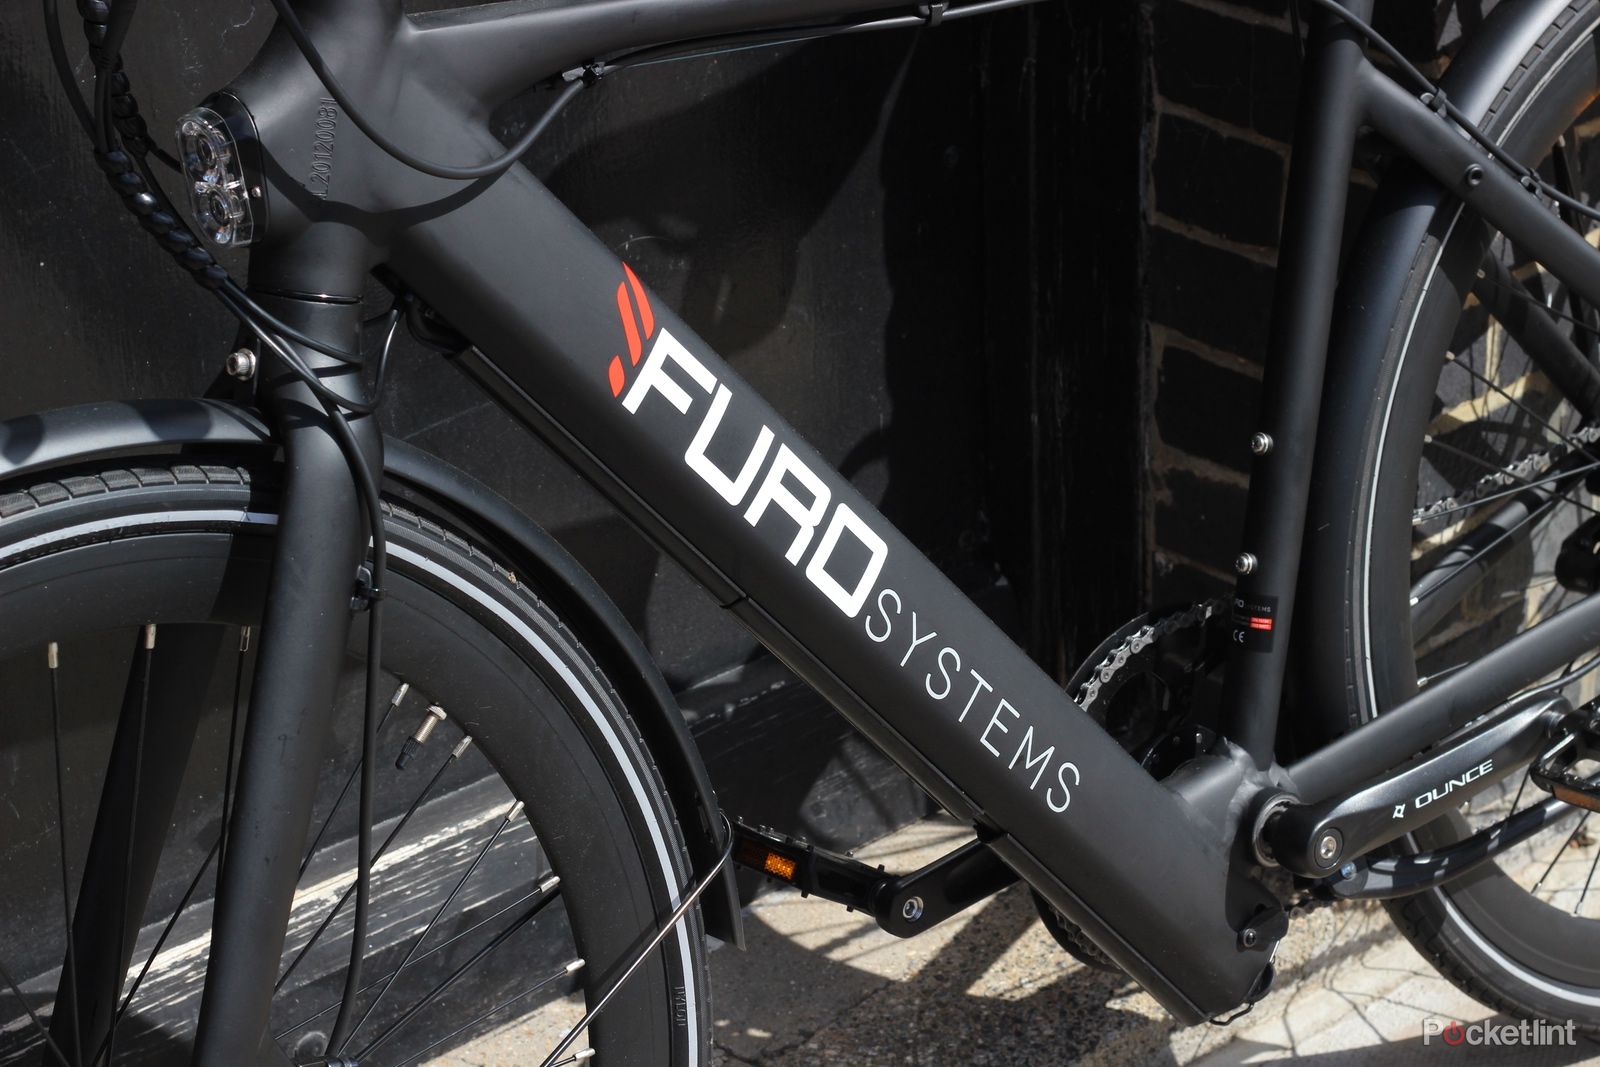 FuroSystems Aventa bike review: Fast and furious photo 3